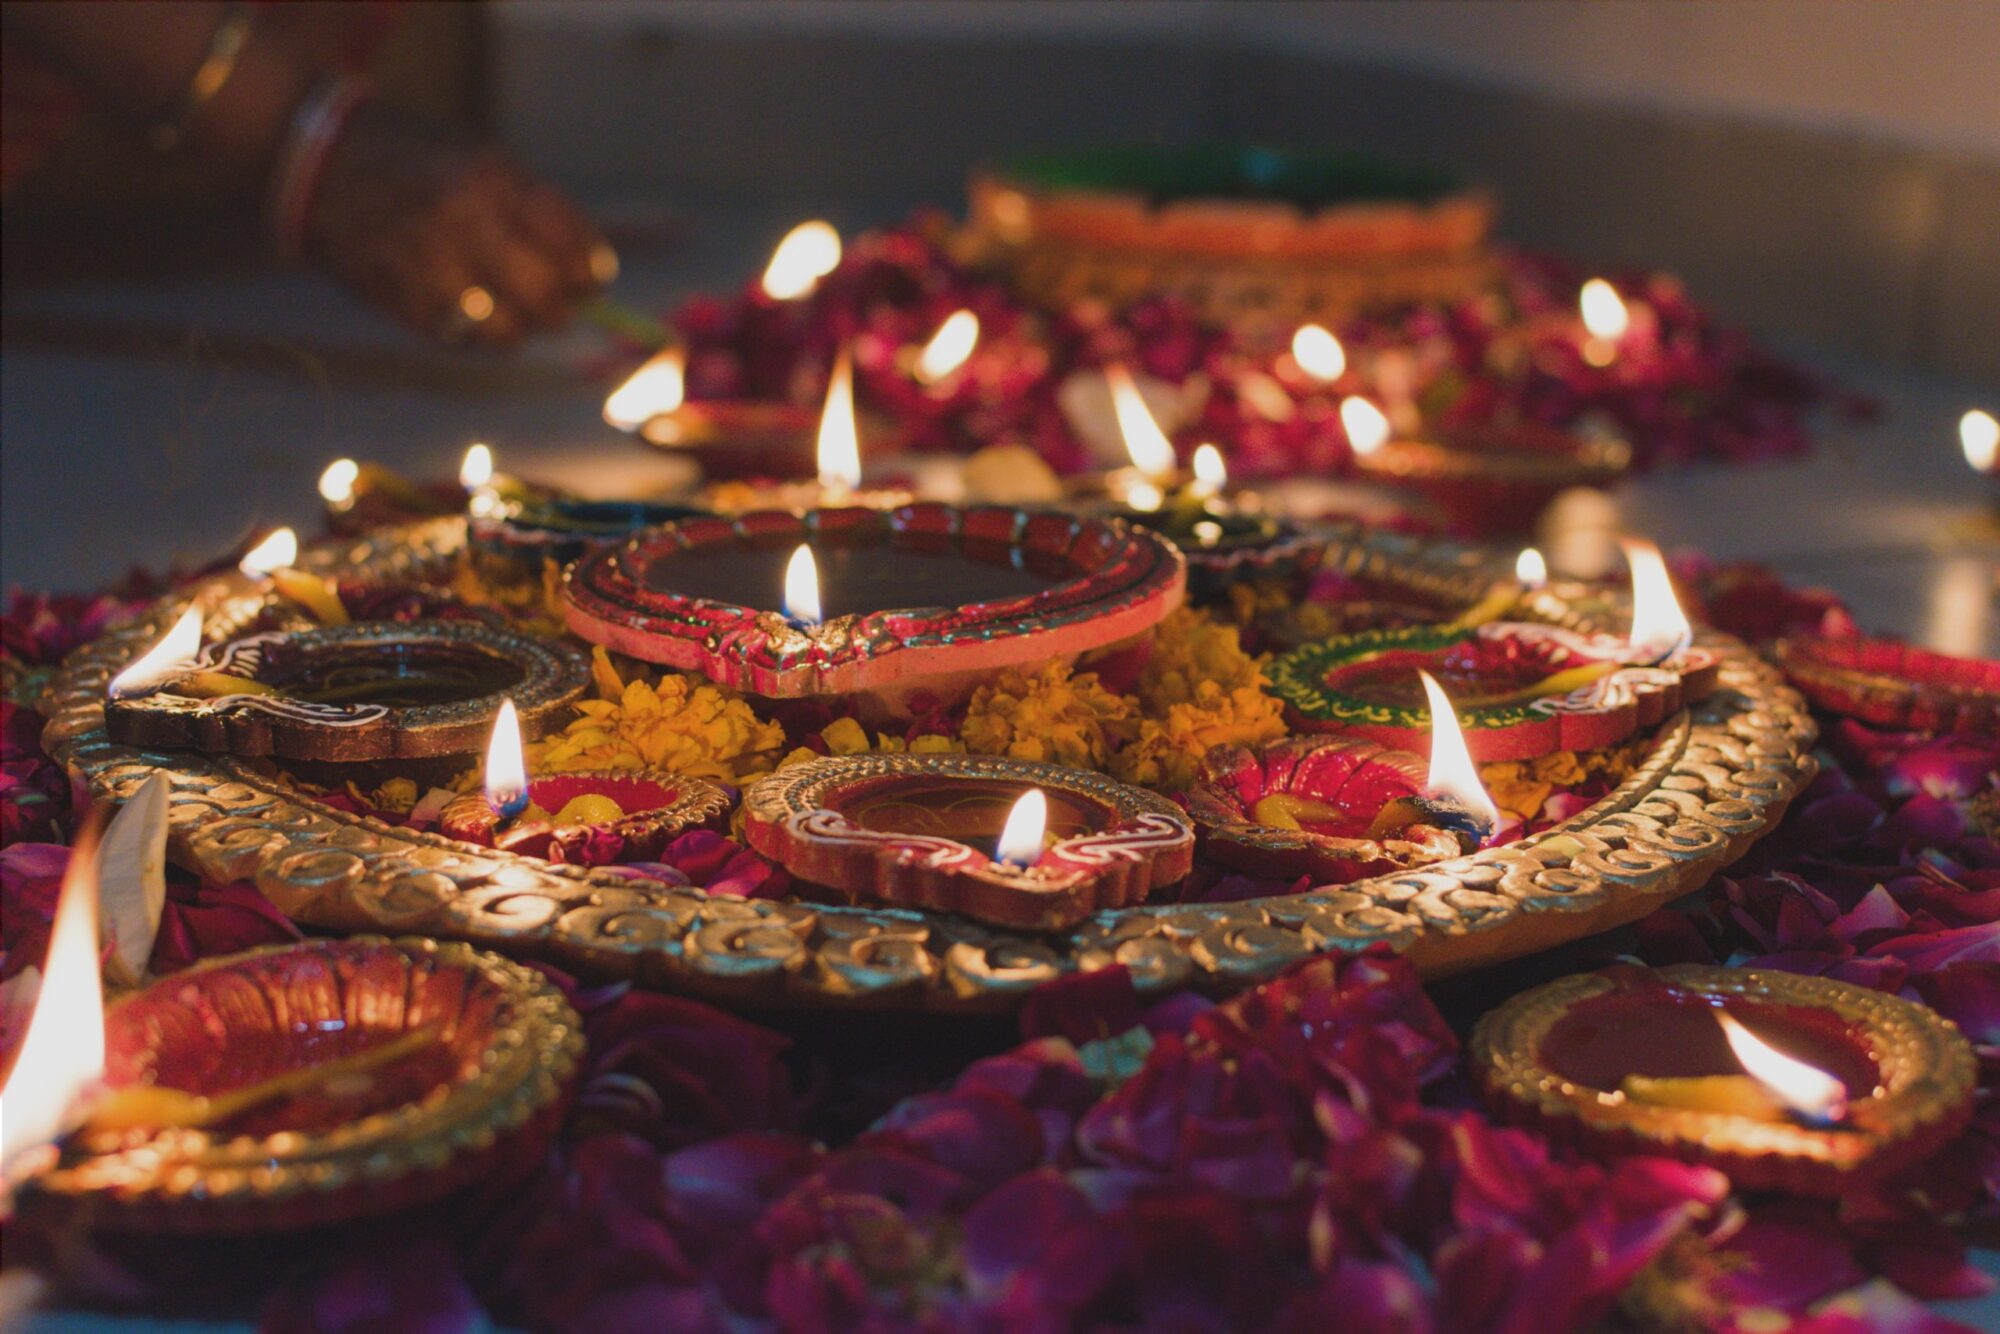 dish of many lit candles and flower petals